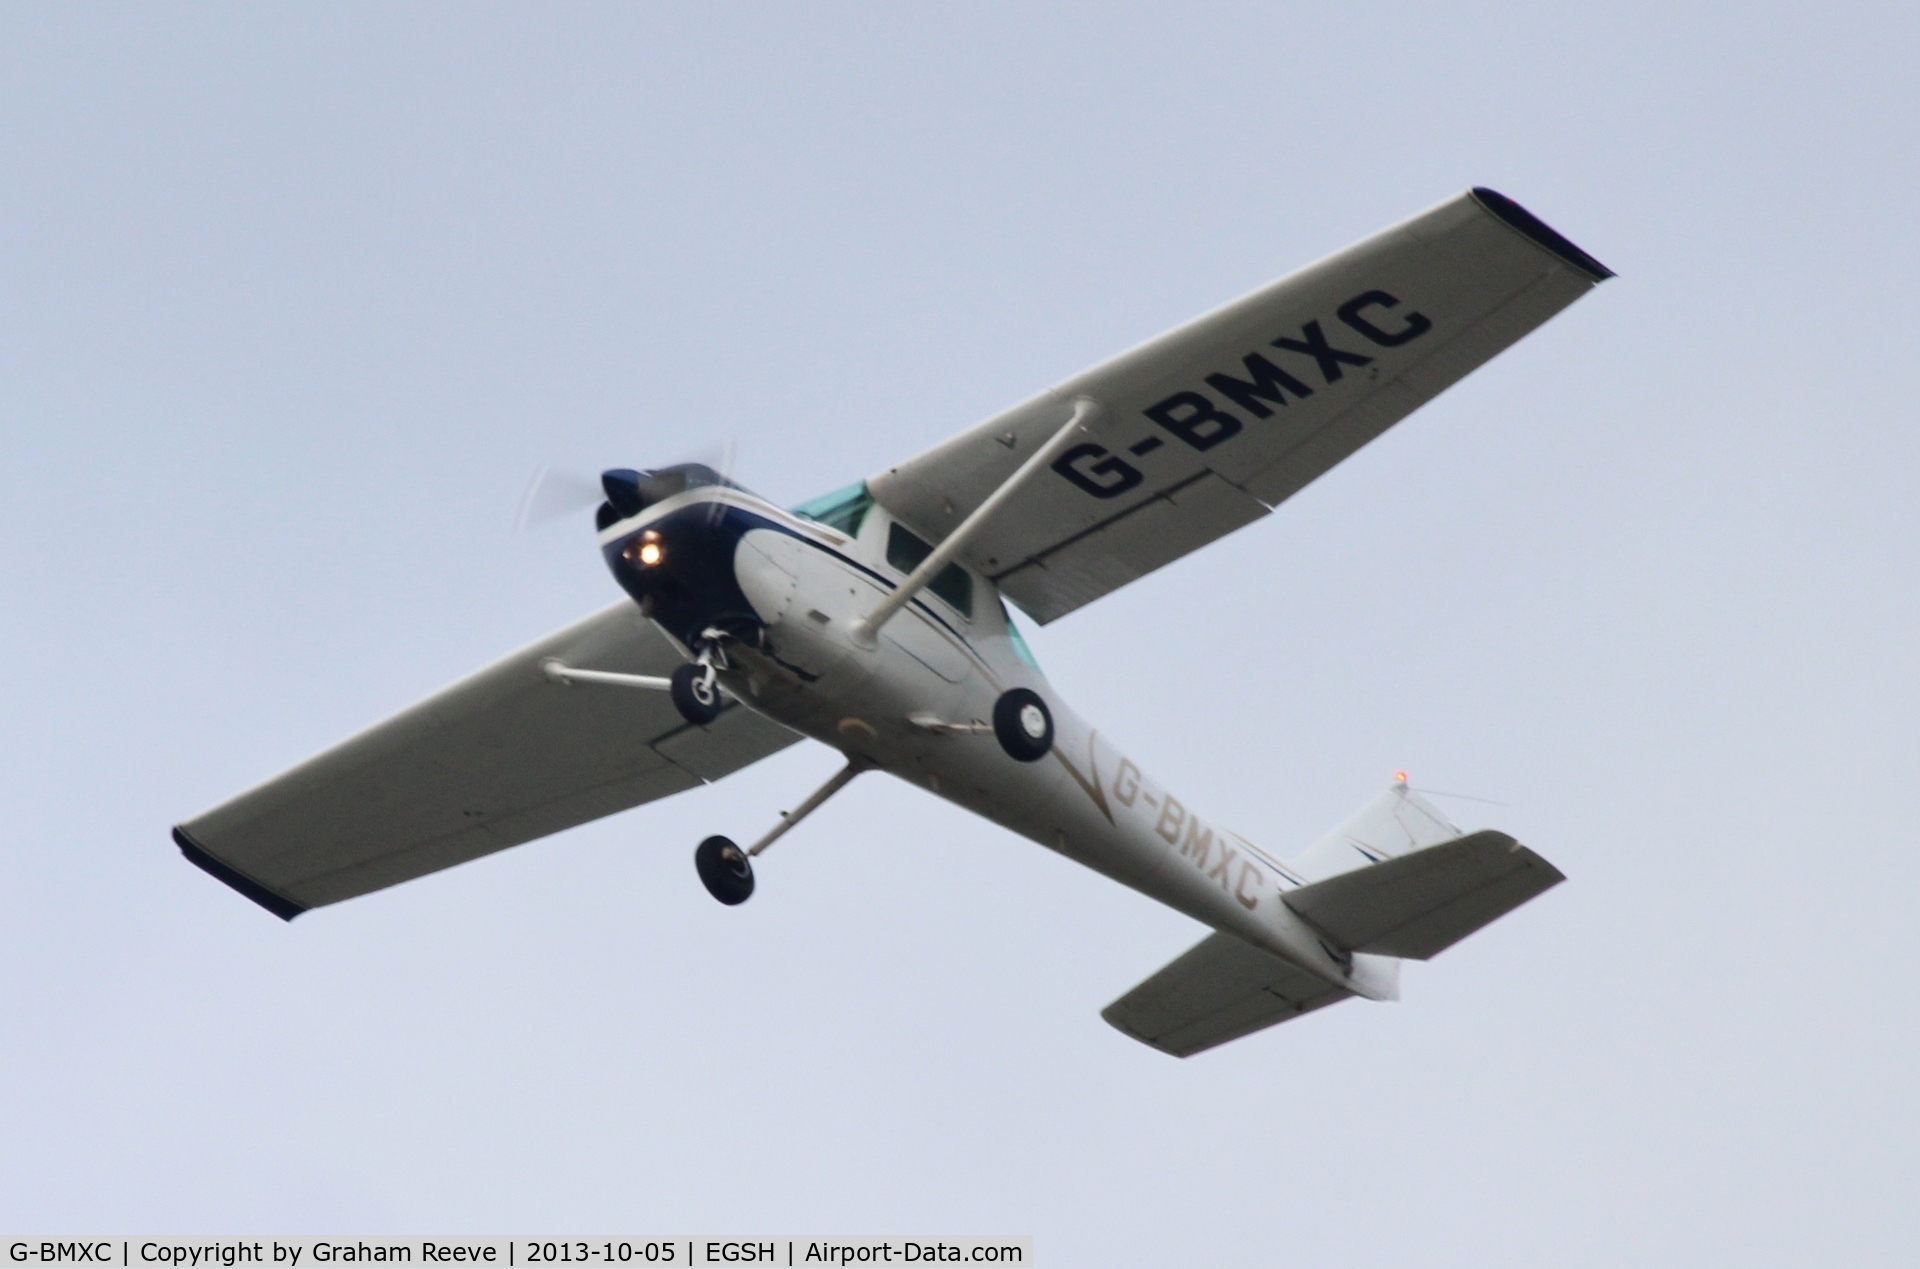 G-BMXC, 1977 Cessna 152 C/N 152-80416, Just taken off from Norwich.